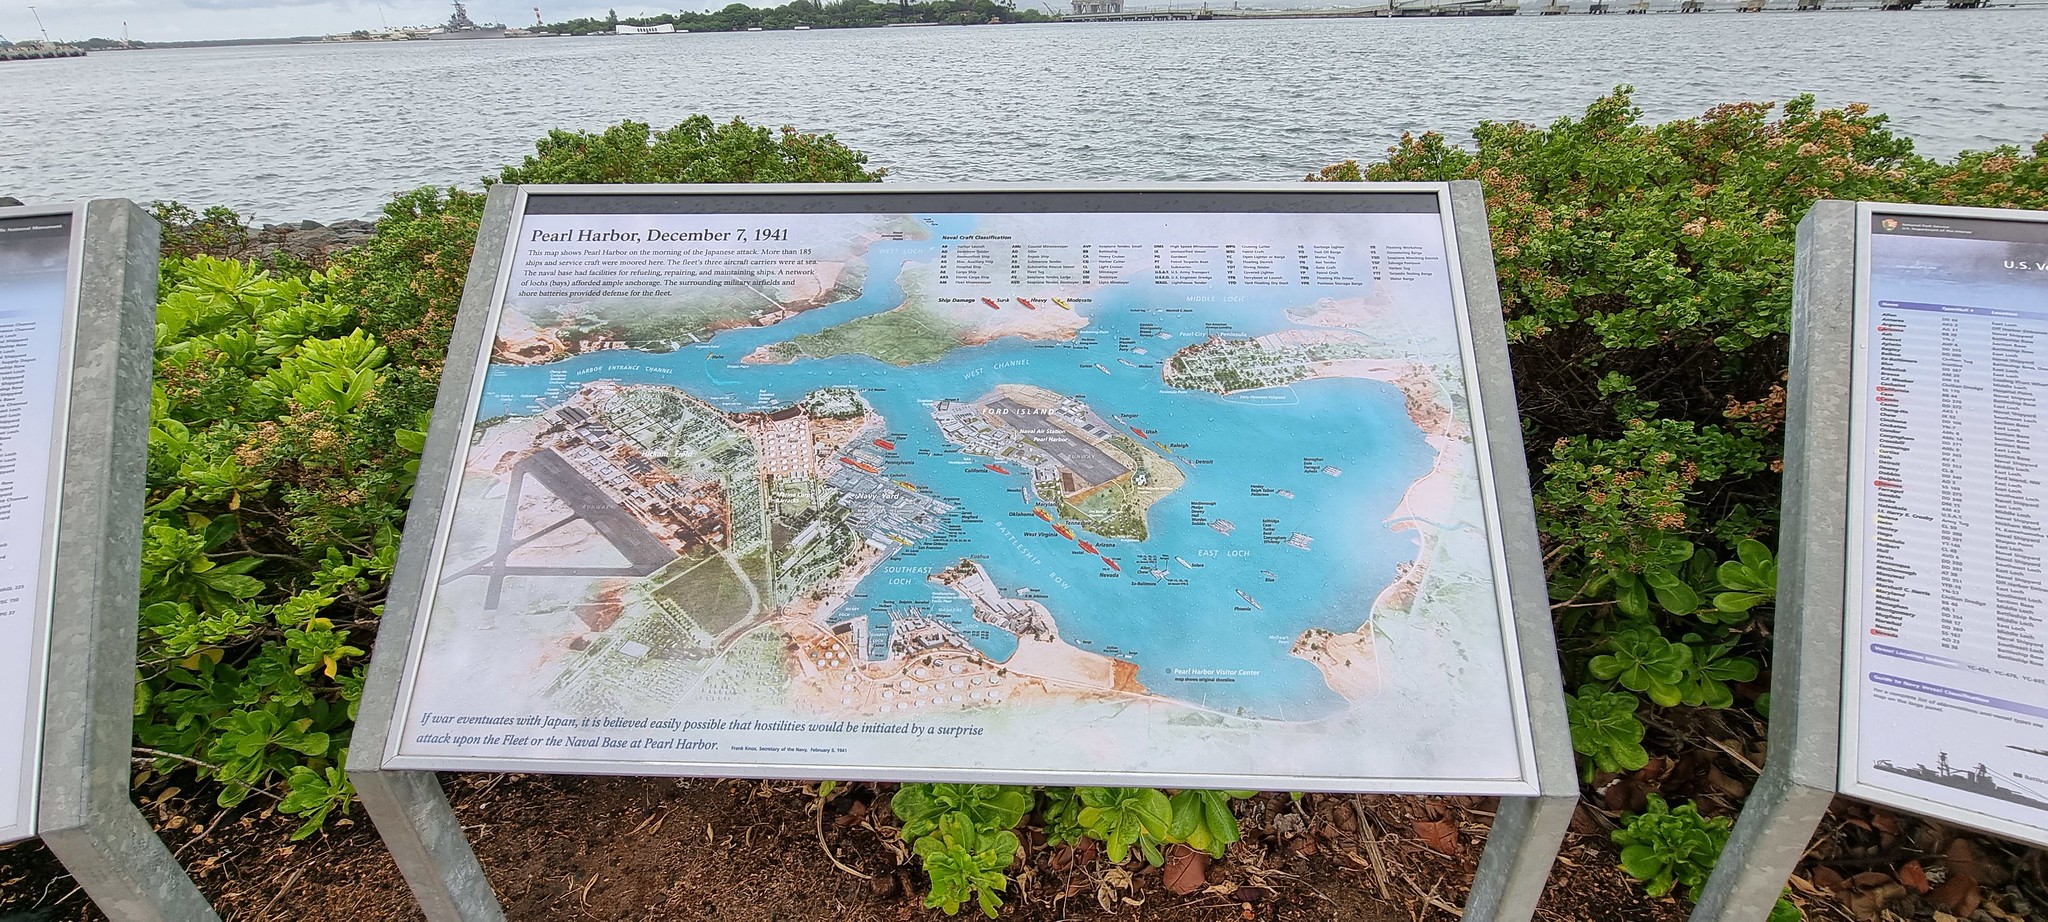 A map of Pearl Harbor back in the day in 1941